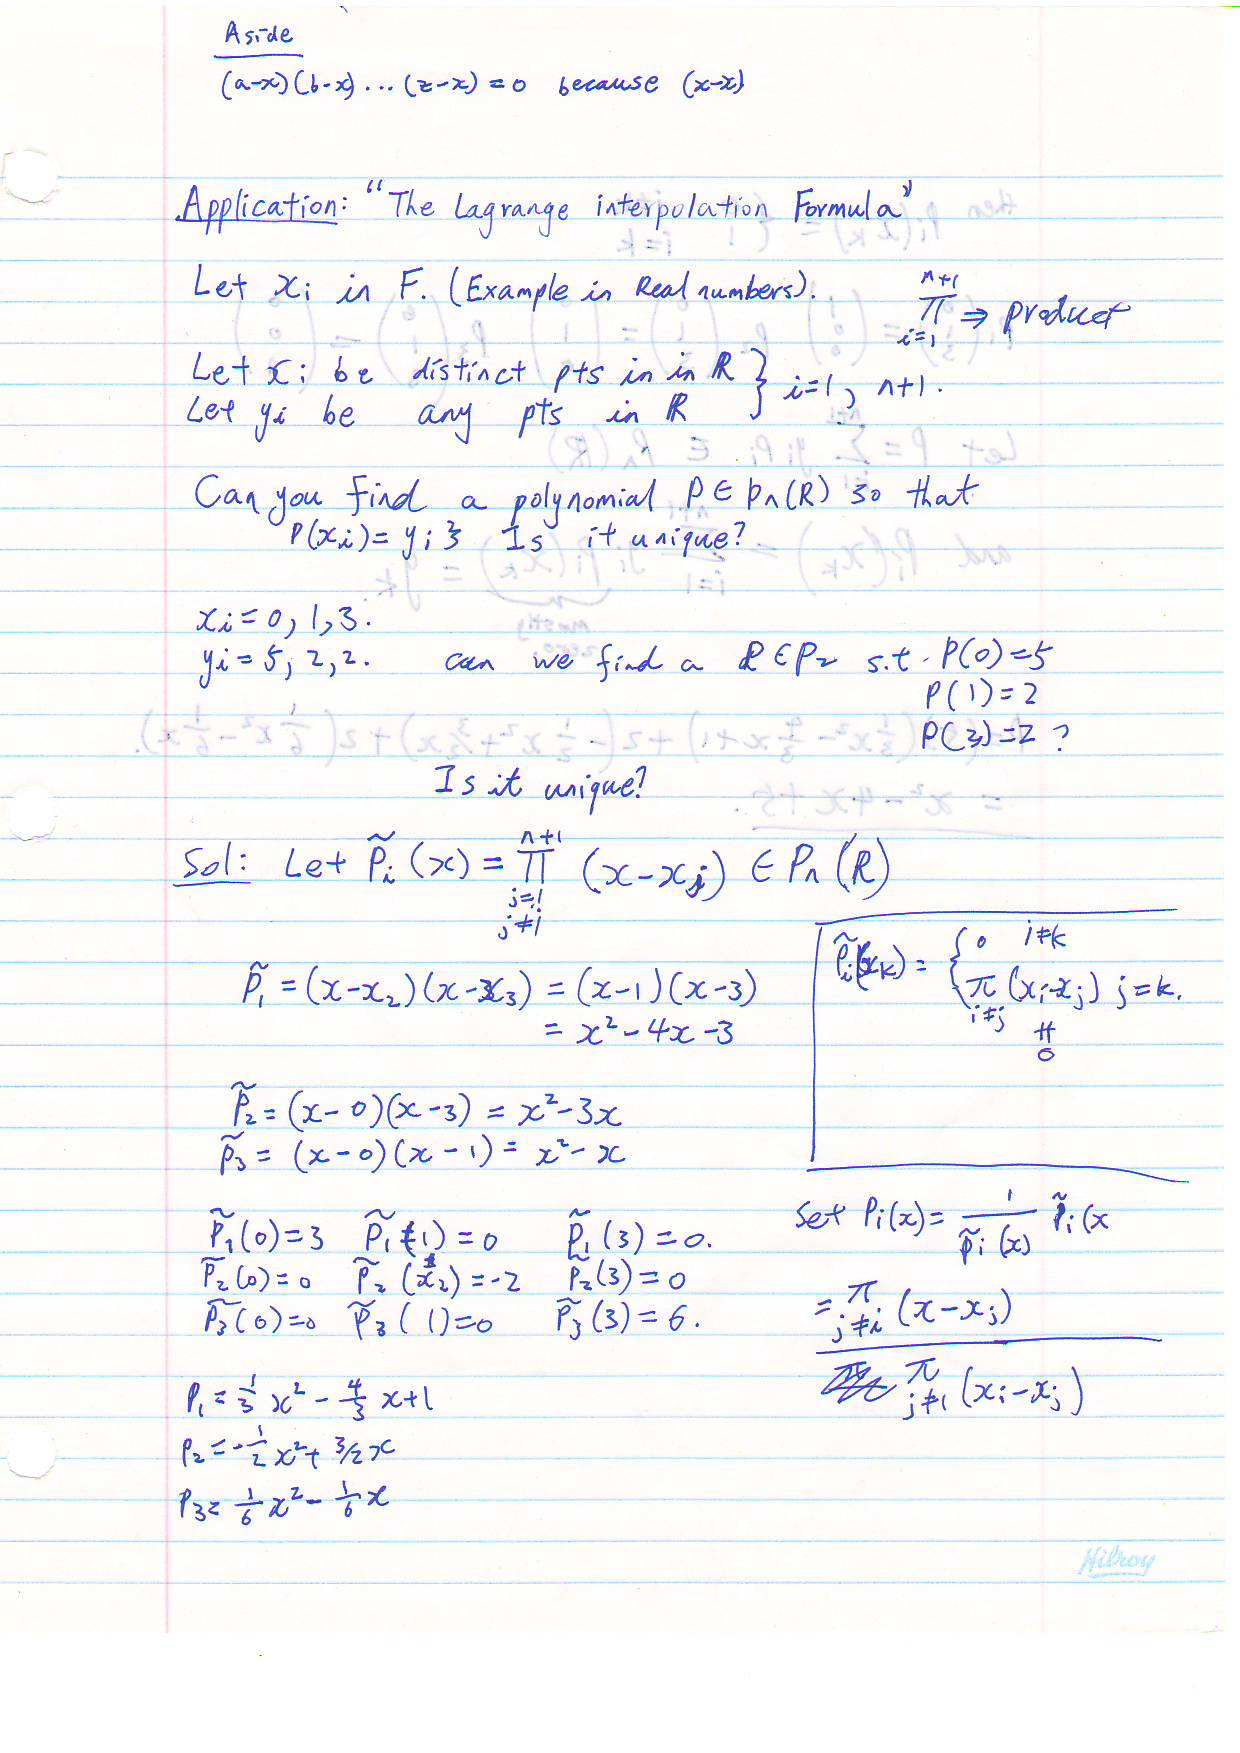 Oct 13 notes page 3.JPG